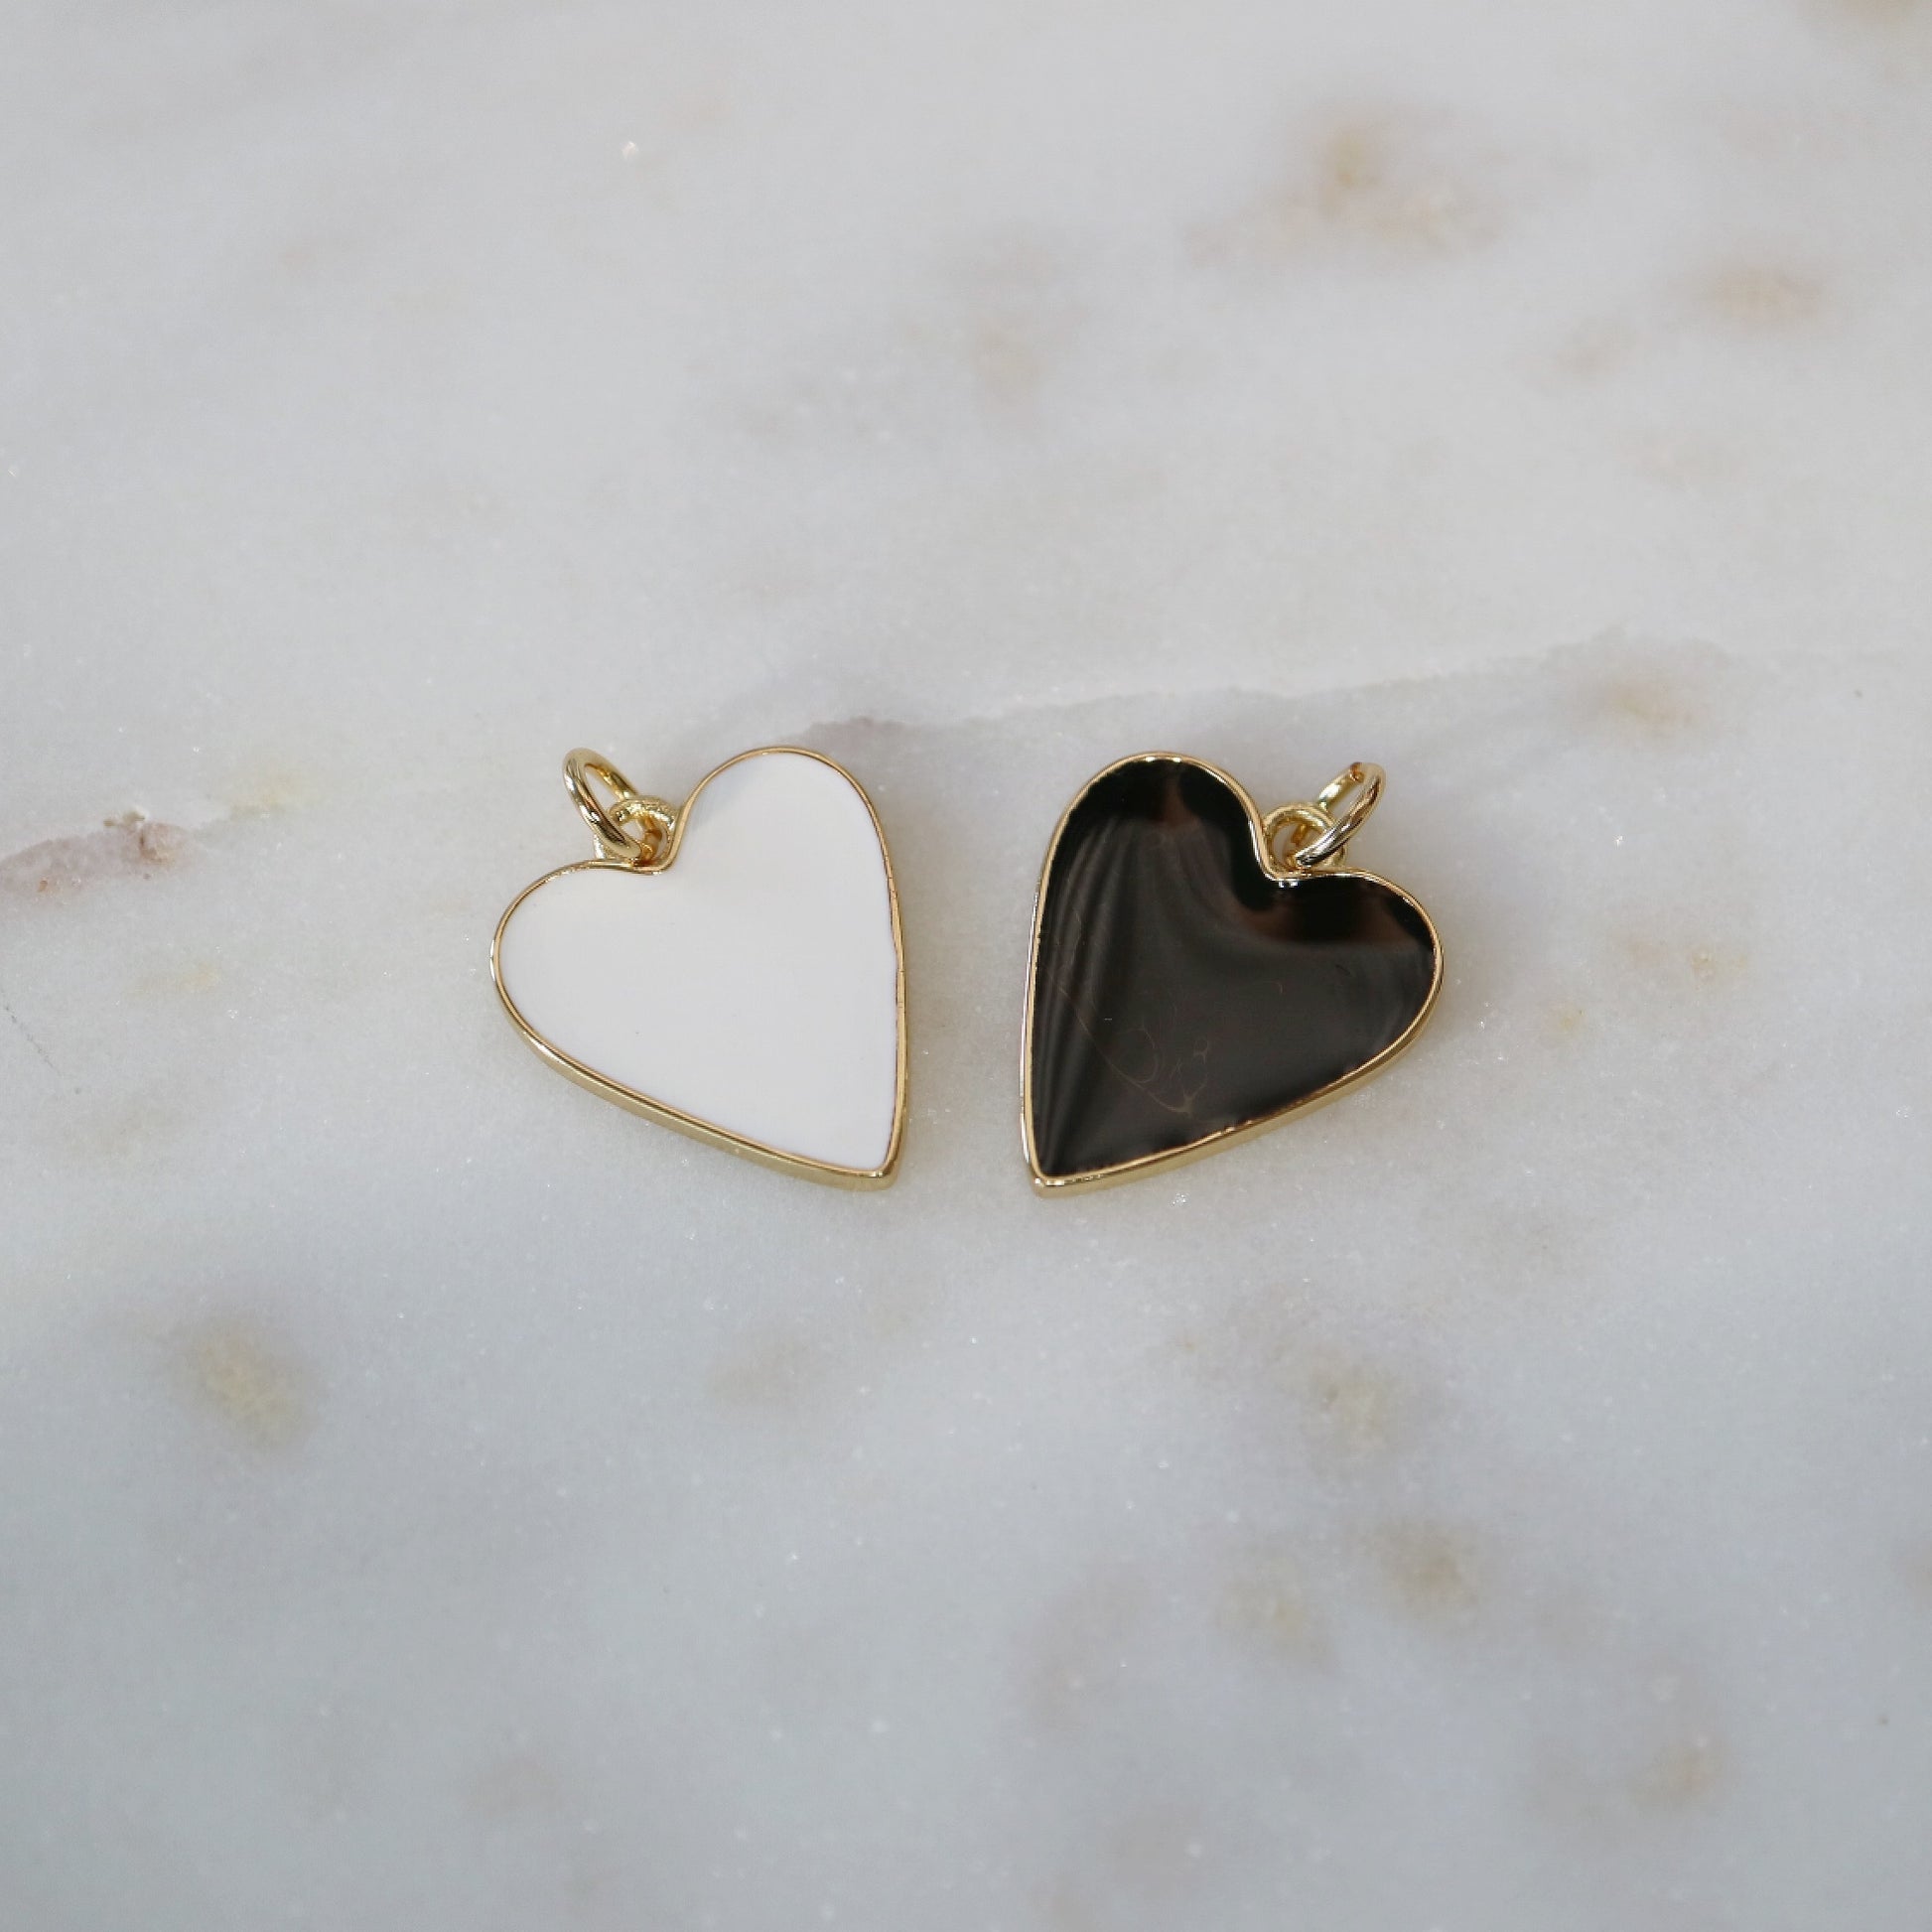 24kt gold plated enamel heart jewellery charms or pendants